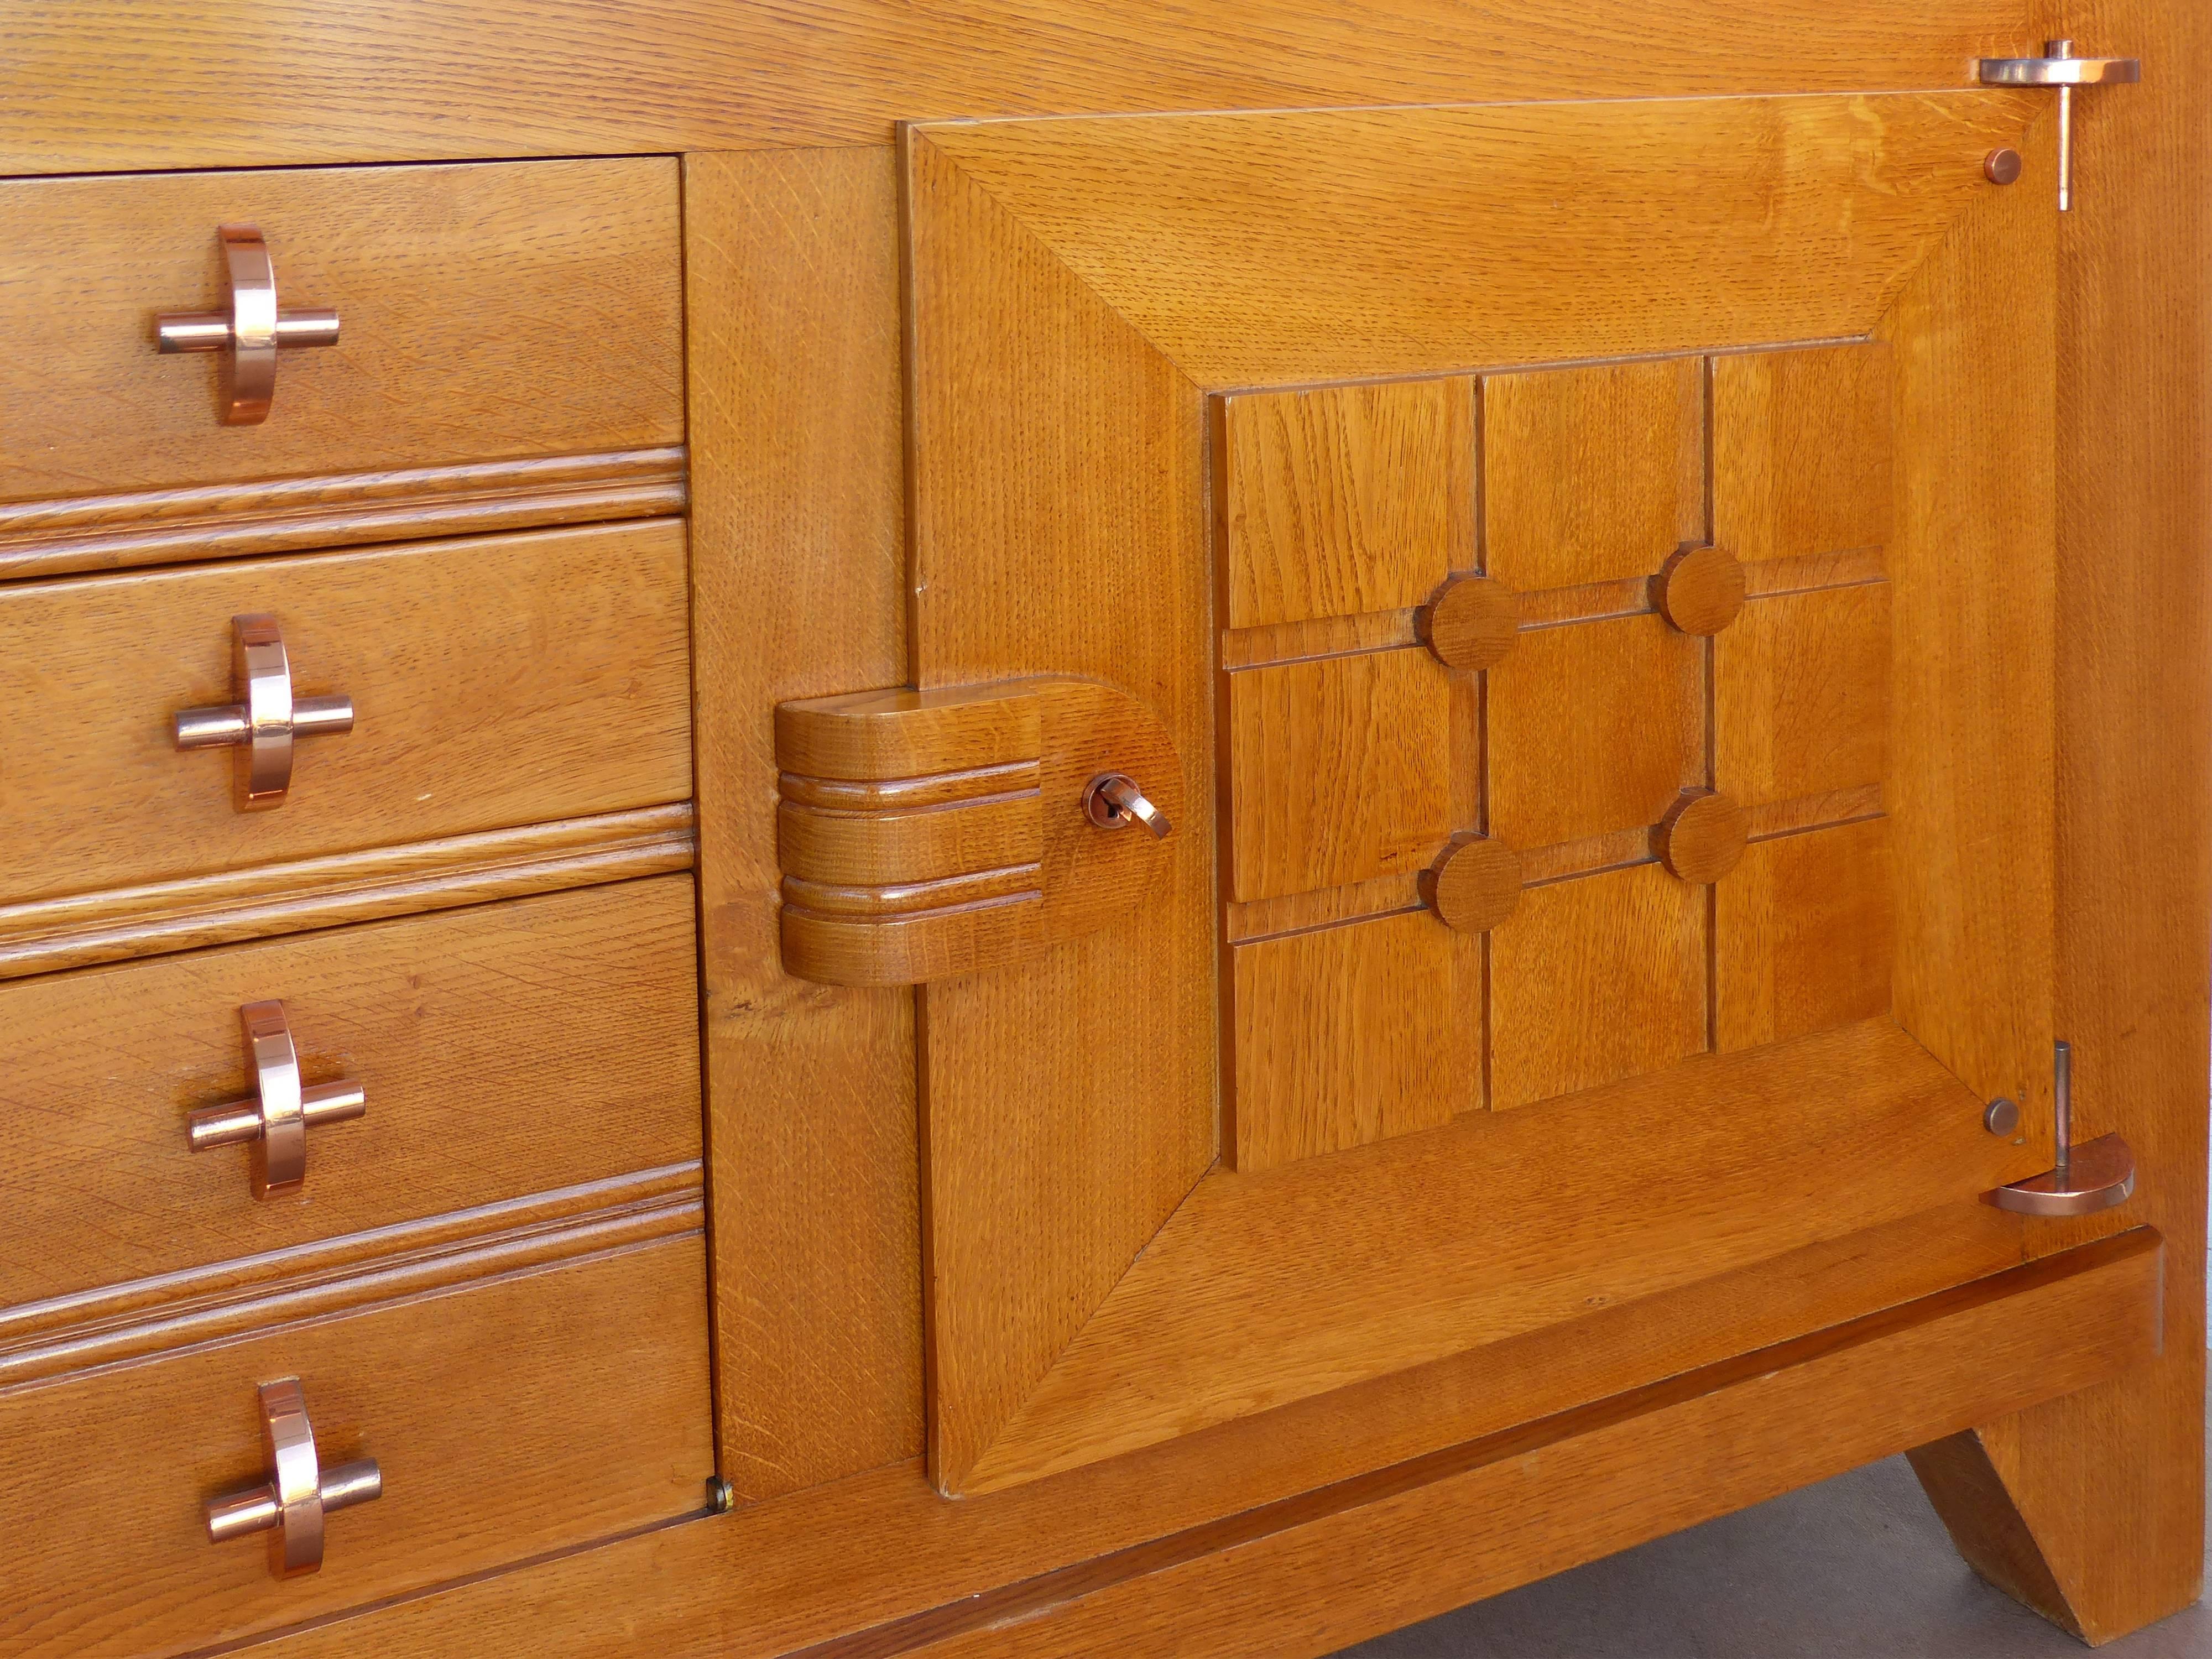 A French solid oak sideboard from the 1940s by Charles Dudouyt. A beautifully constructed cabinet with high-style copper hardware and elegant subtle carved details. Has two central drawers and a drop down compartment below. Flanked by two doors